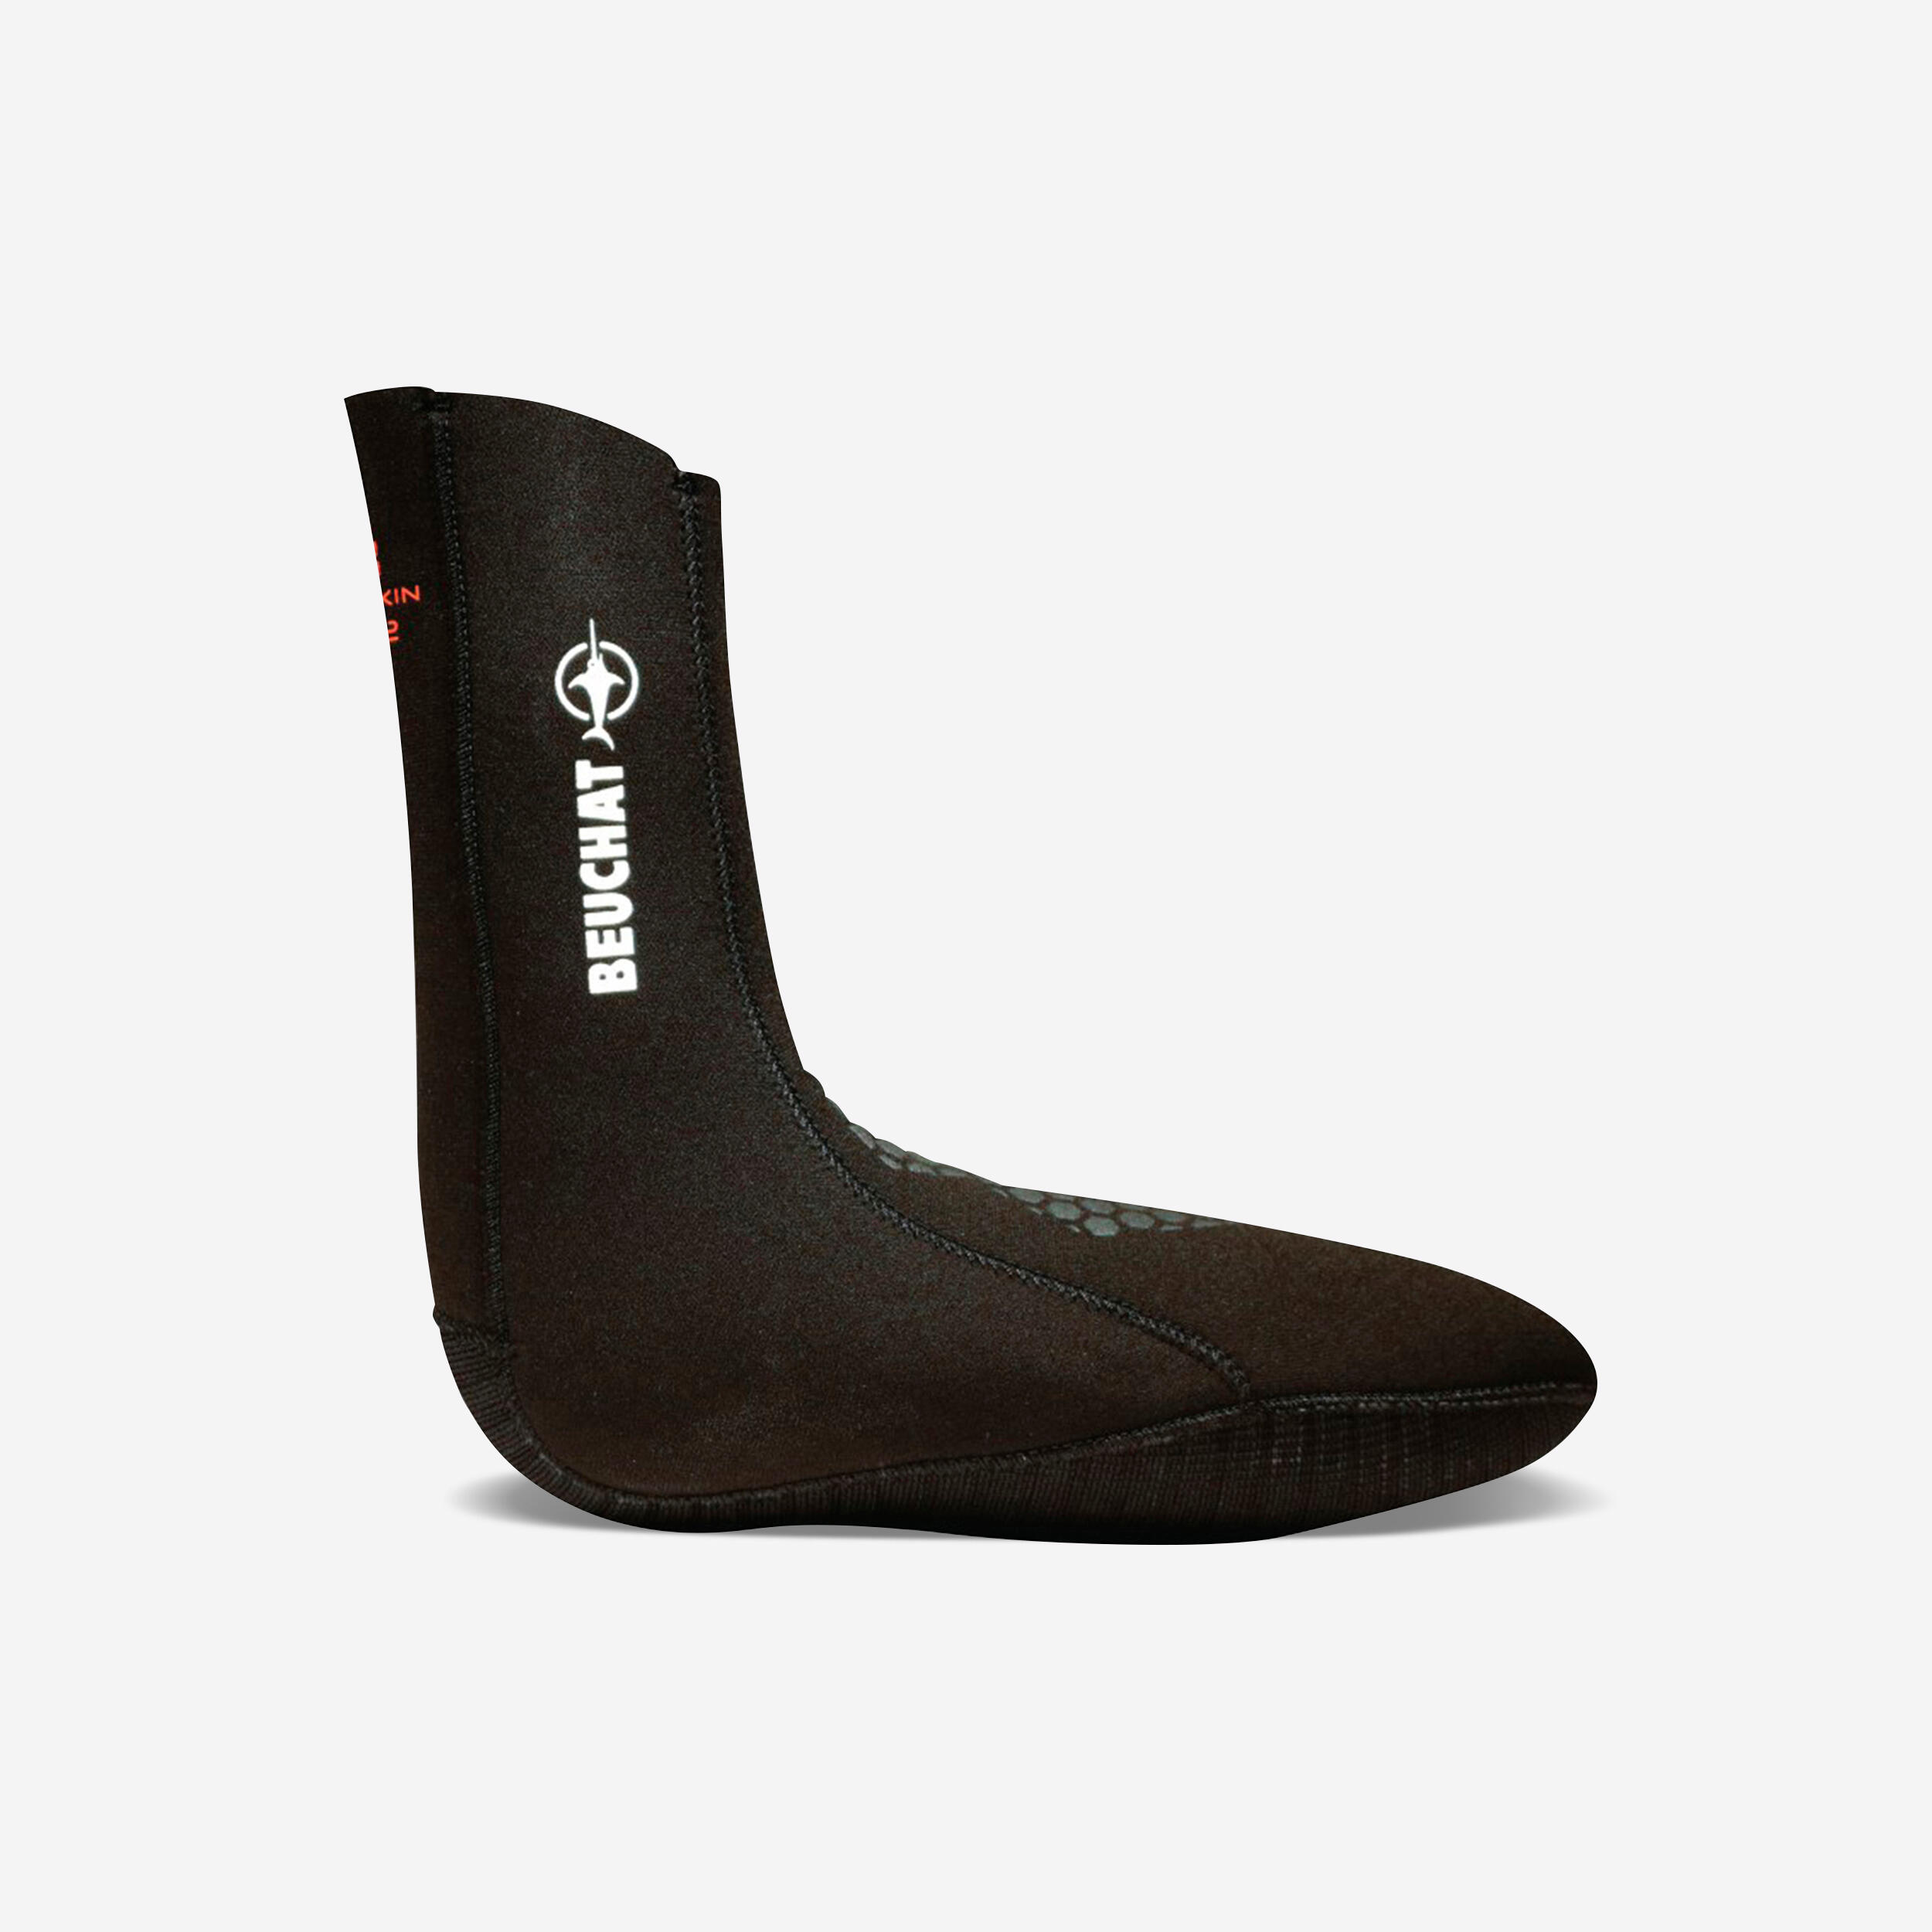 SIROCCO ELITE SMOOTH 3 MM SOCKS FOR UNDERWATER SPEARFISHING 1/1